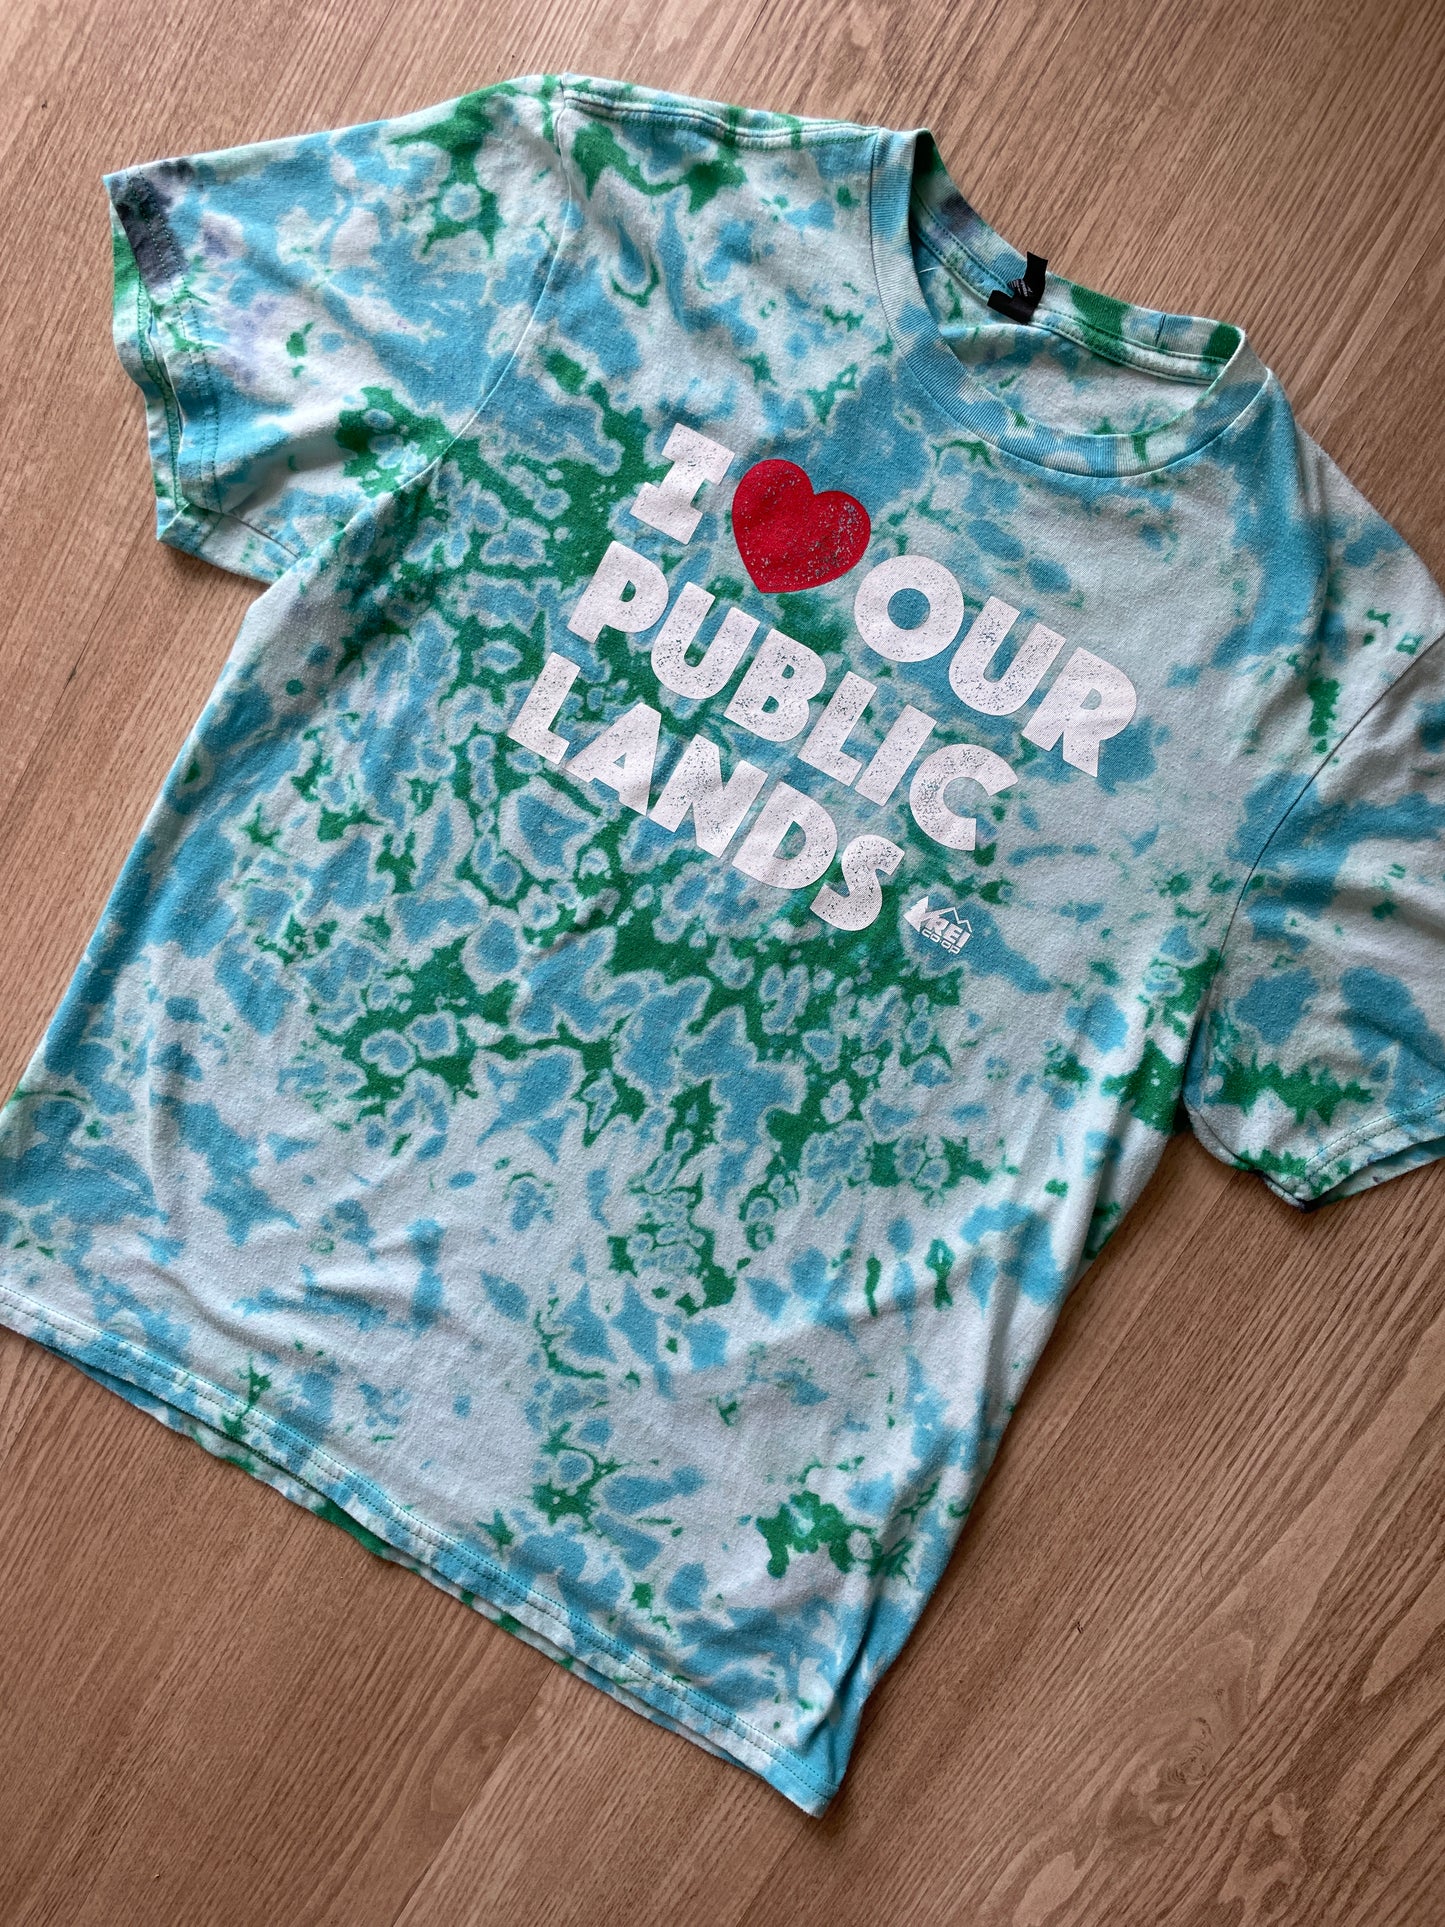 MEDIUM Men’s I Heart Our Public Lands Handmade Tie Dye T-Shirt | One-Of-a-Kind Green and White Short Sleeve